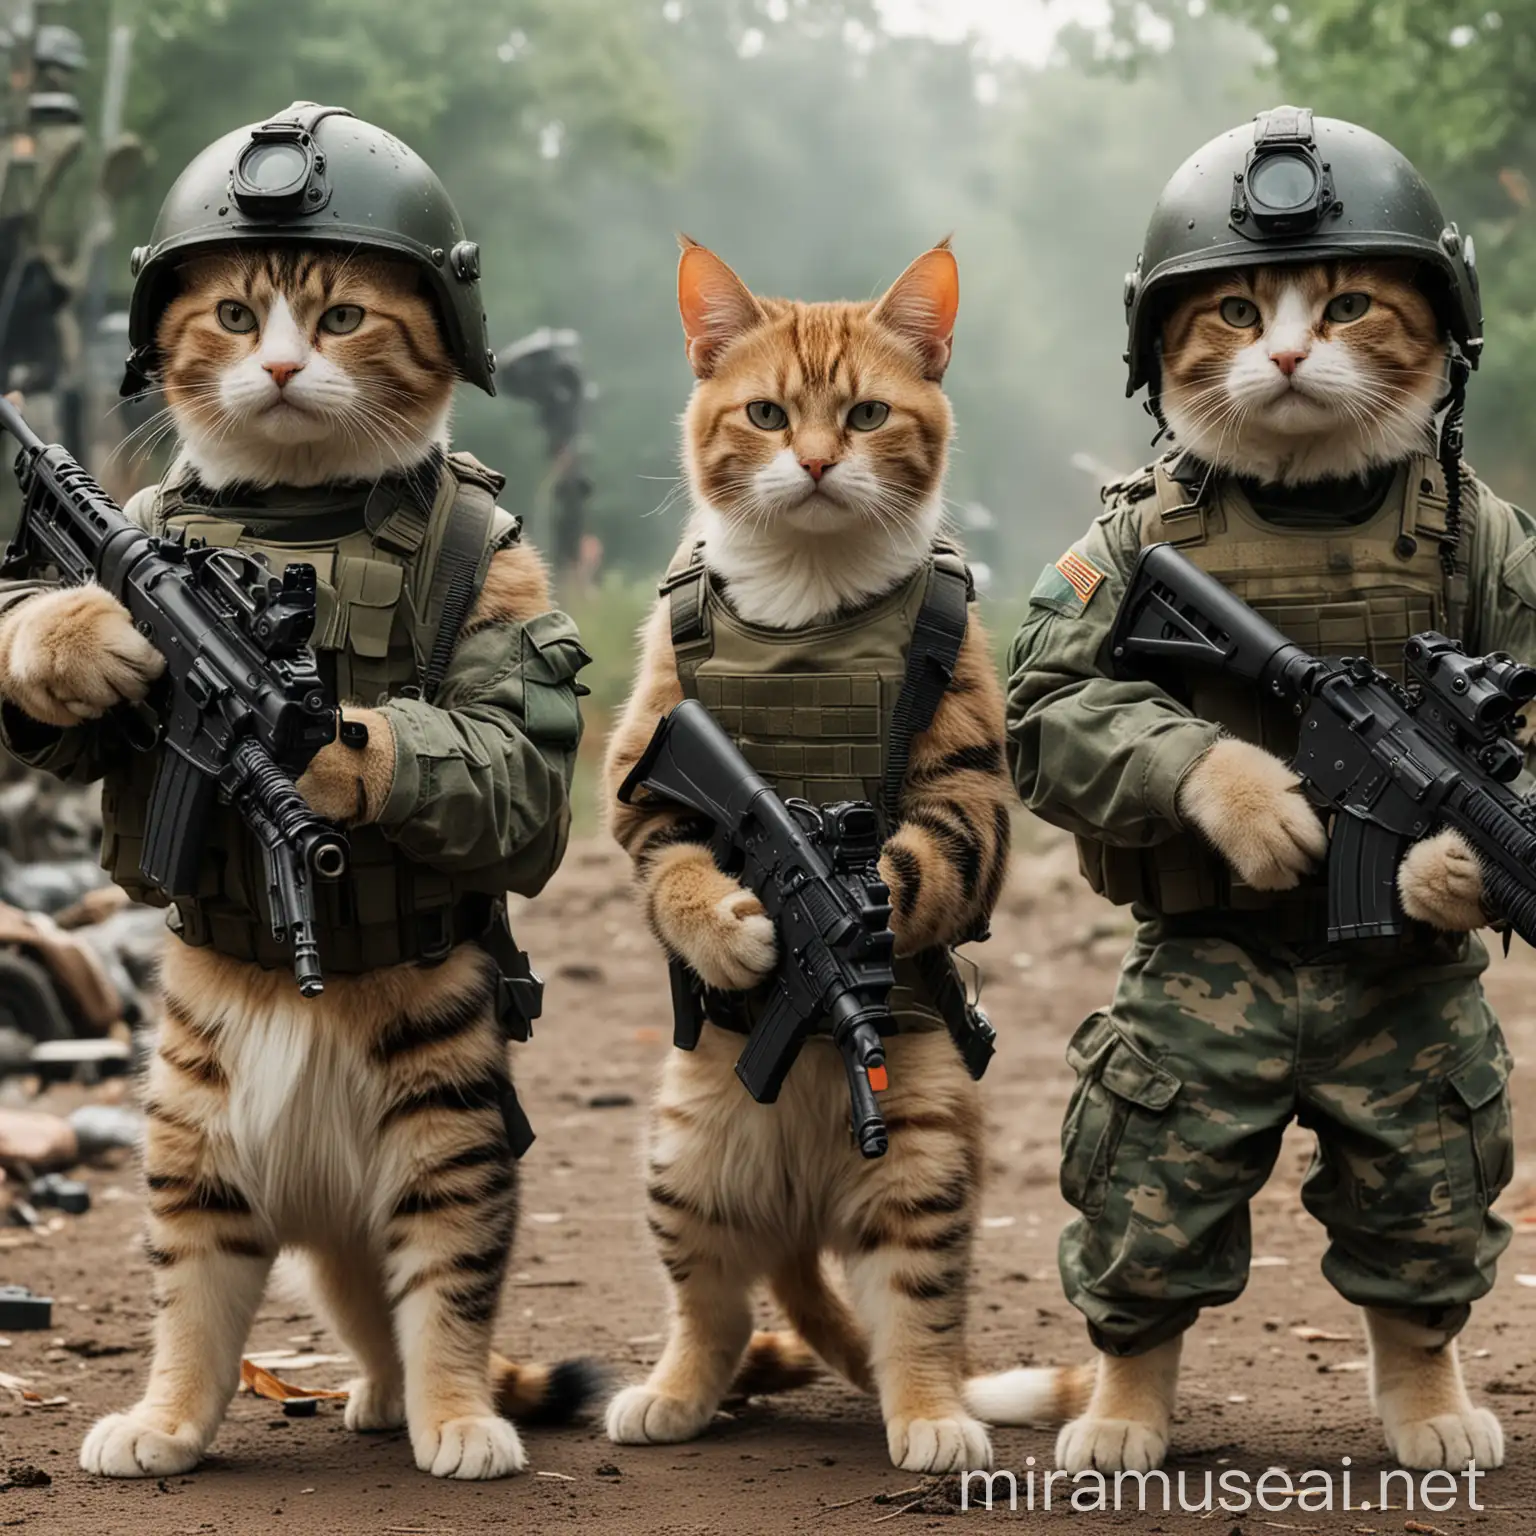 Military Cats Scene 90s Movie Style with Guns and Helmet